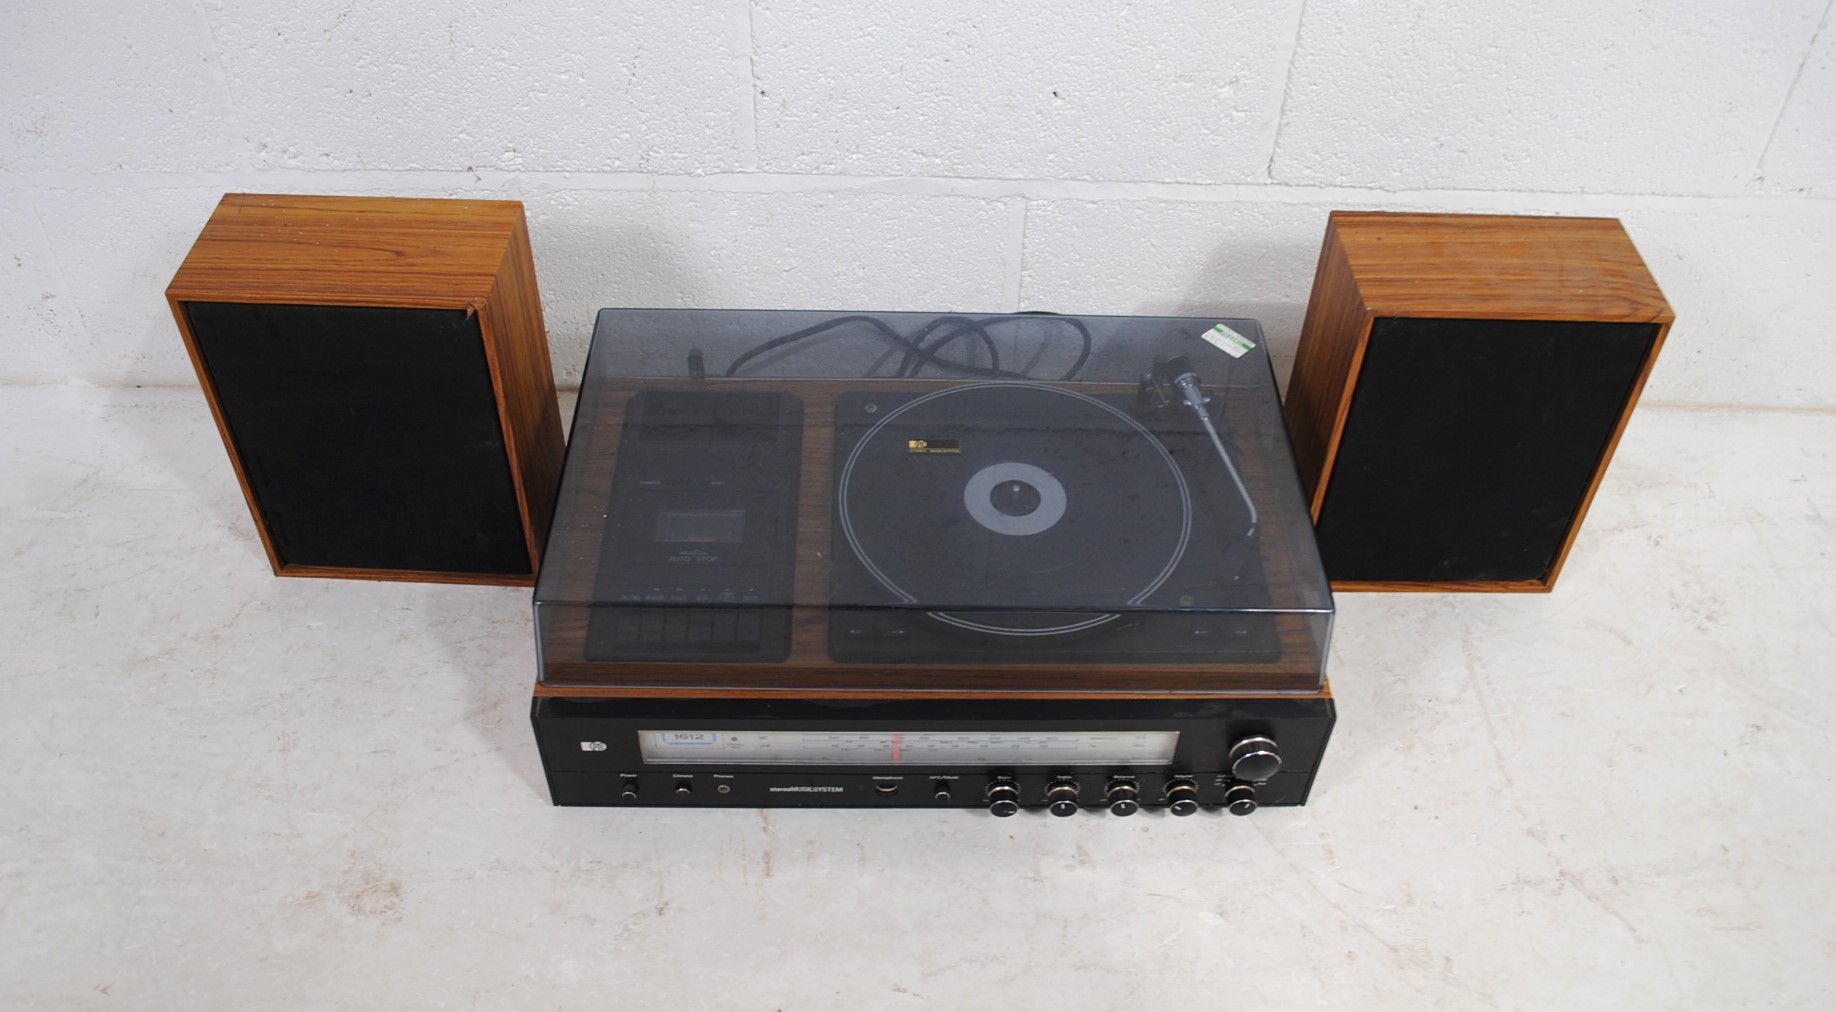 A vintage Pye 1612 stereo music system, including a pair of Pye 5780 8ohm bookshelf speakers - Image 2 of 11